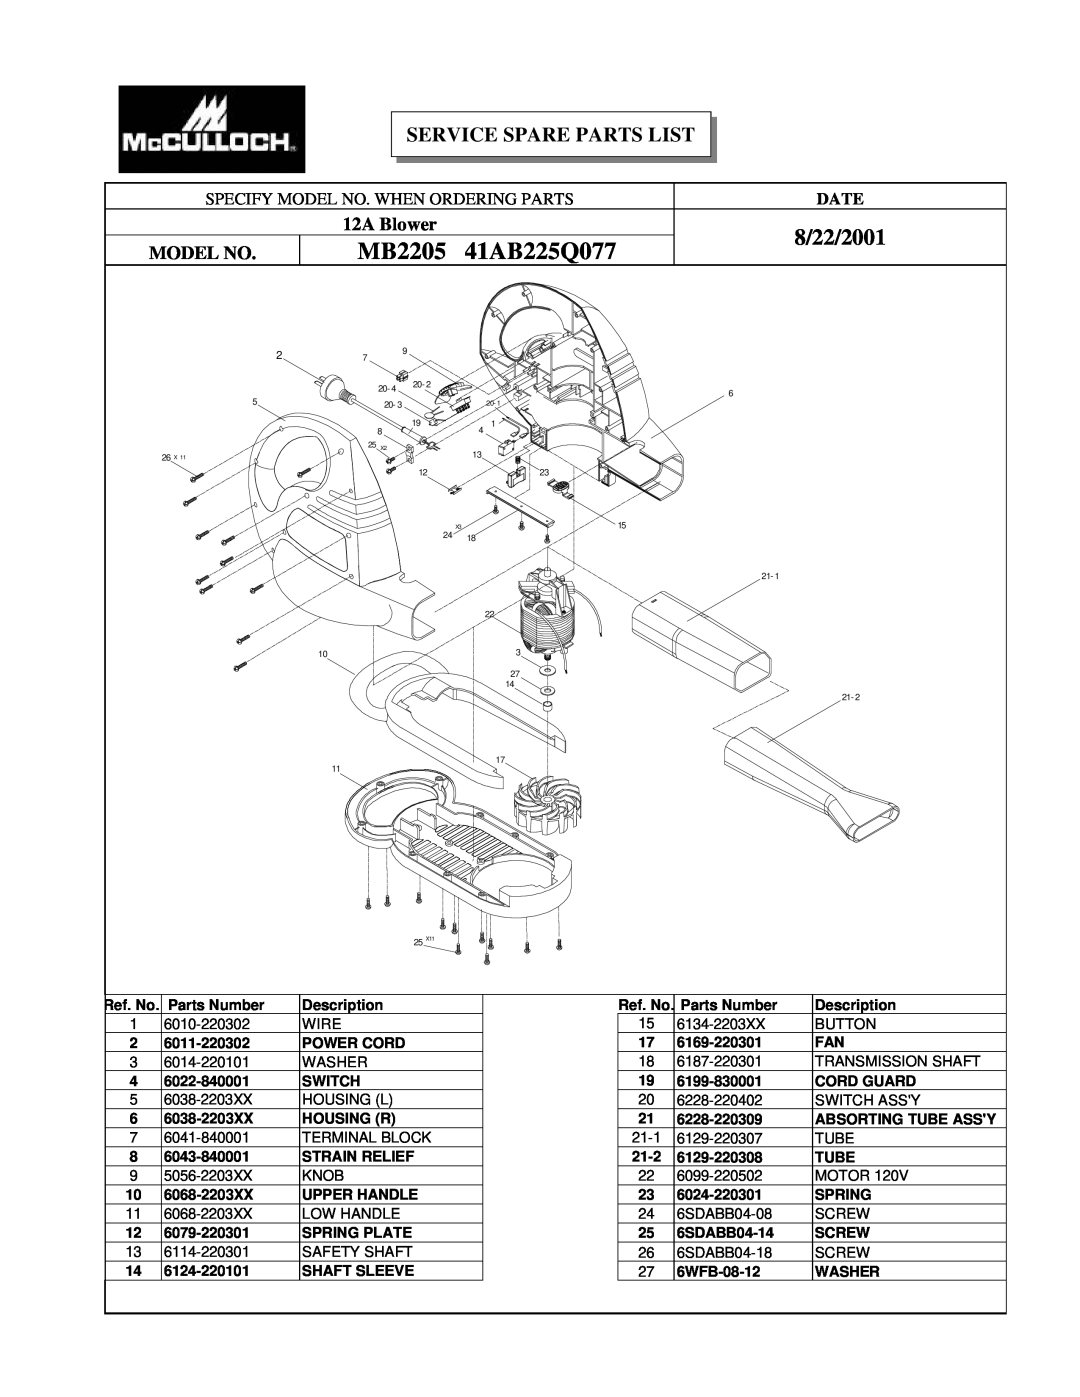 McCulloch manual MB2205 41AB225Q077, 8/22/2001, 12A Blower, Specify Model No. When Ordering Parts, Date 